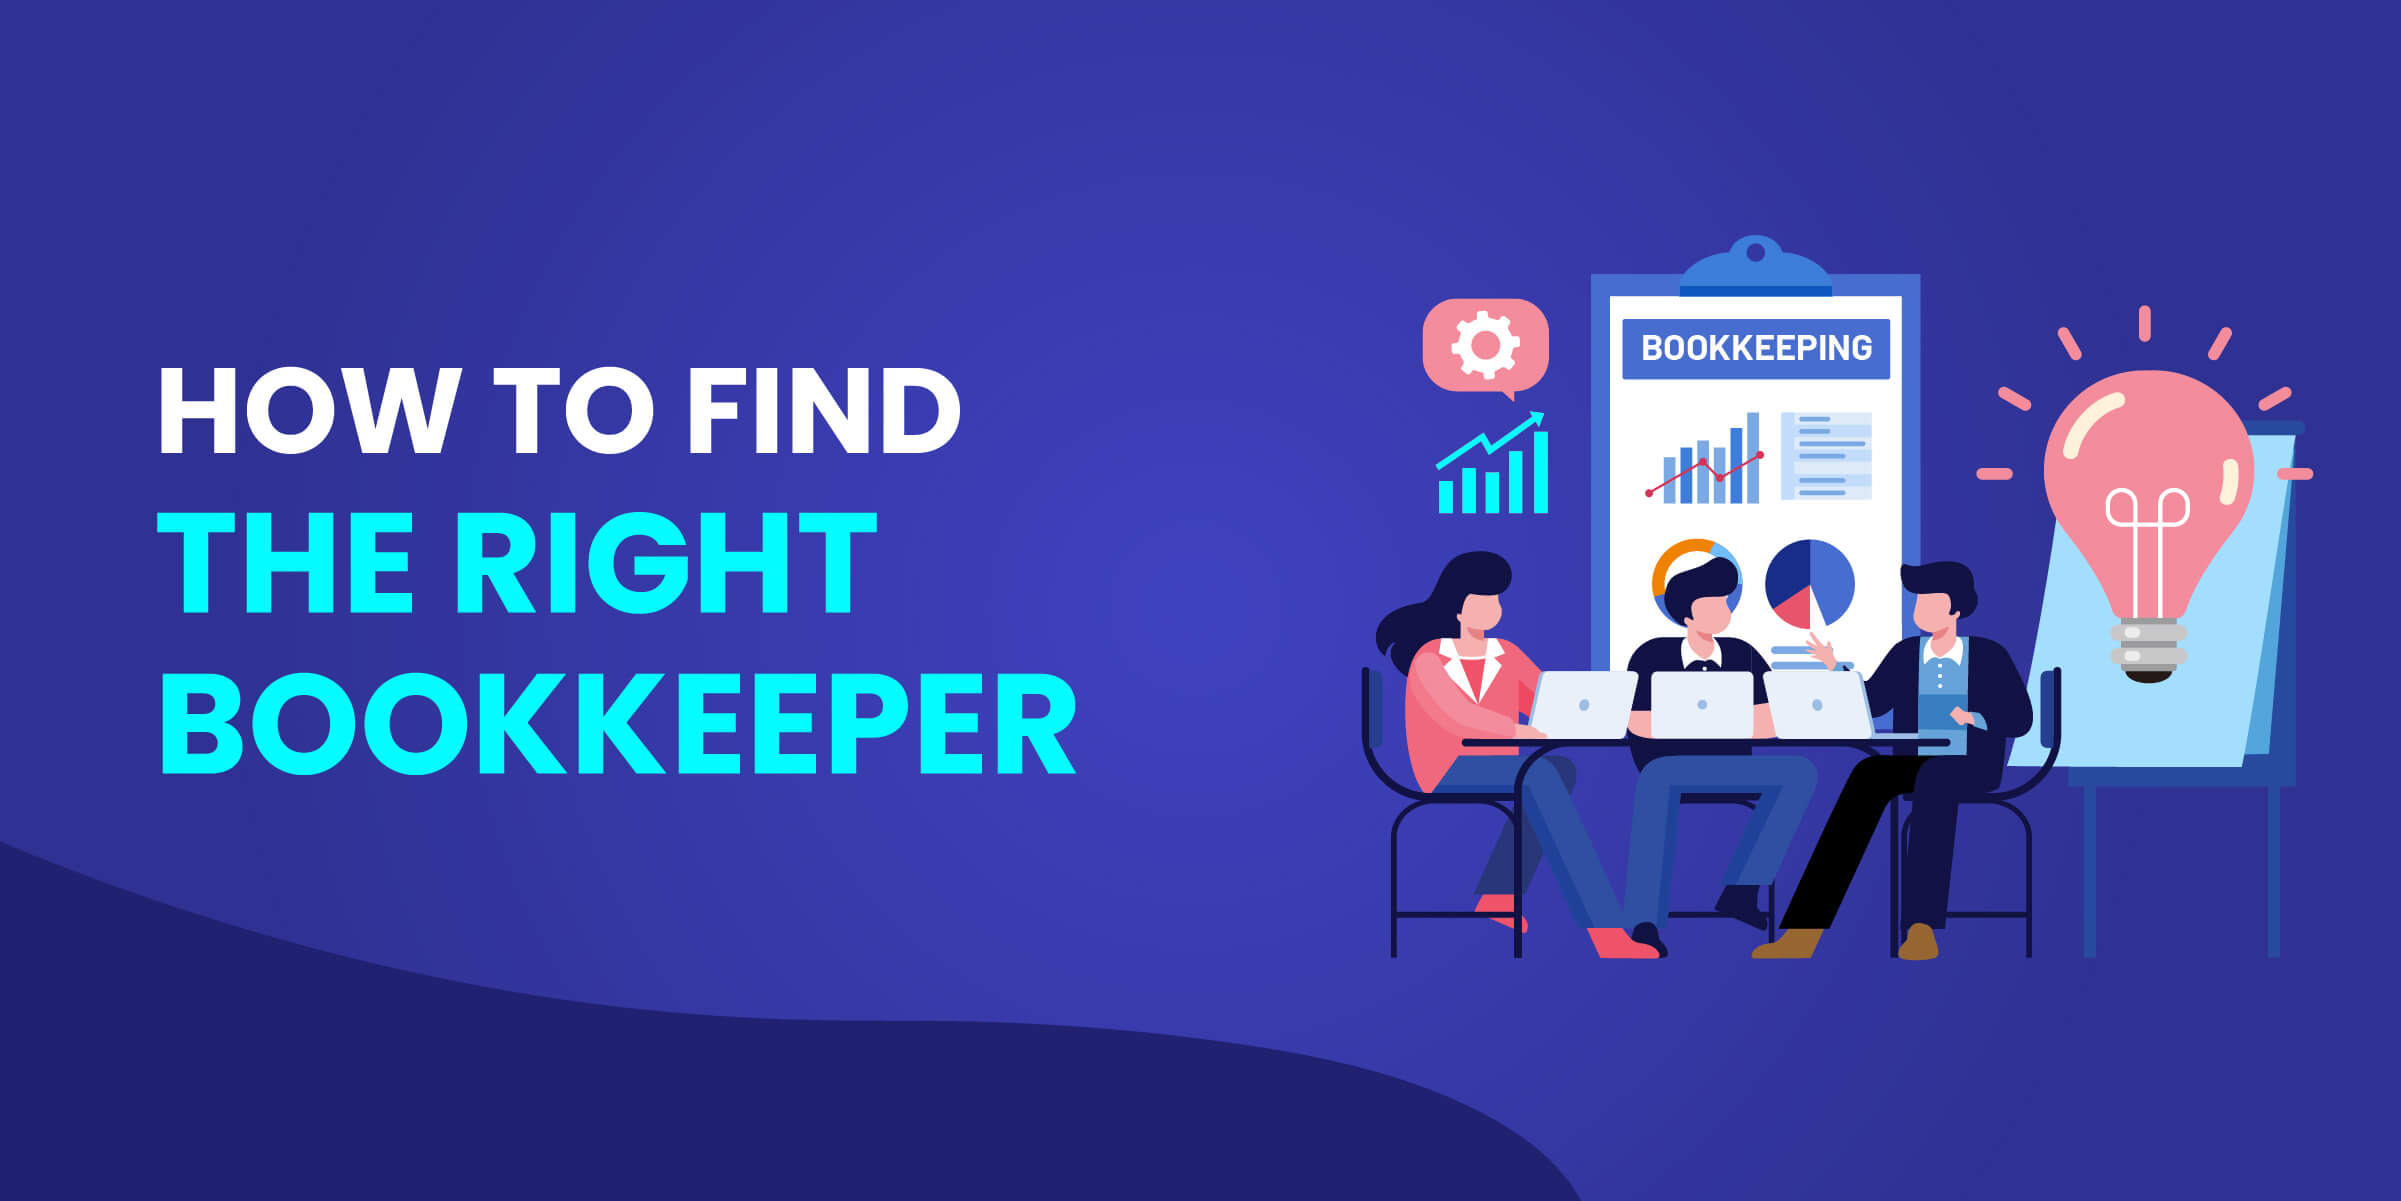 How to Find the Right Bookkeeper